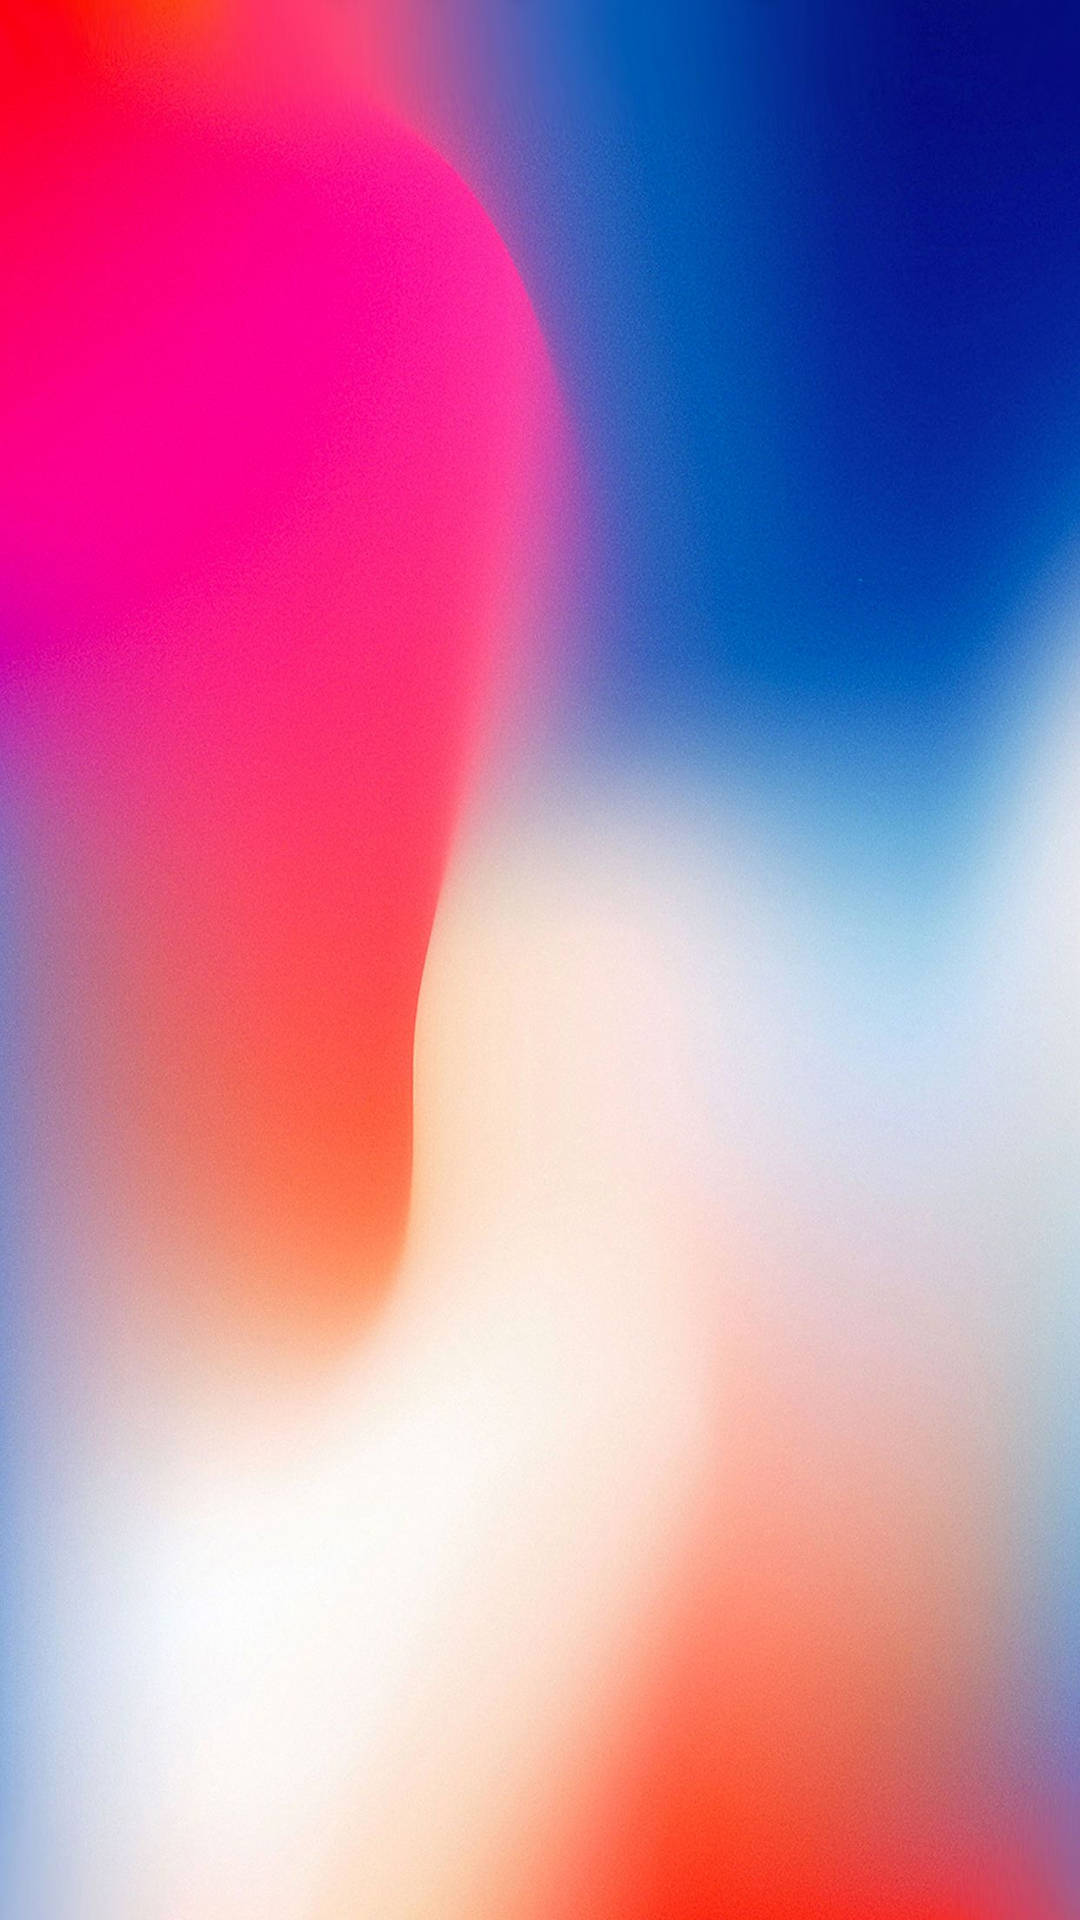 Unlock your new iPhone X with bold lines and vibrant color Wallpaper